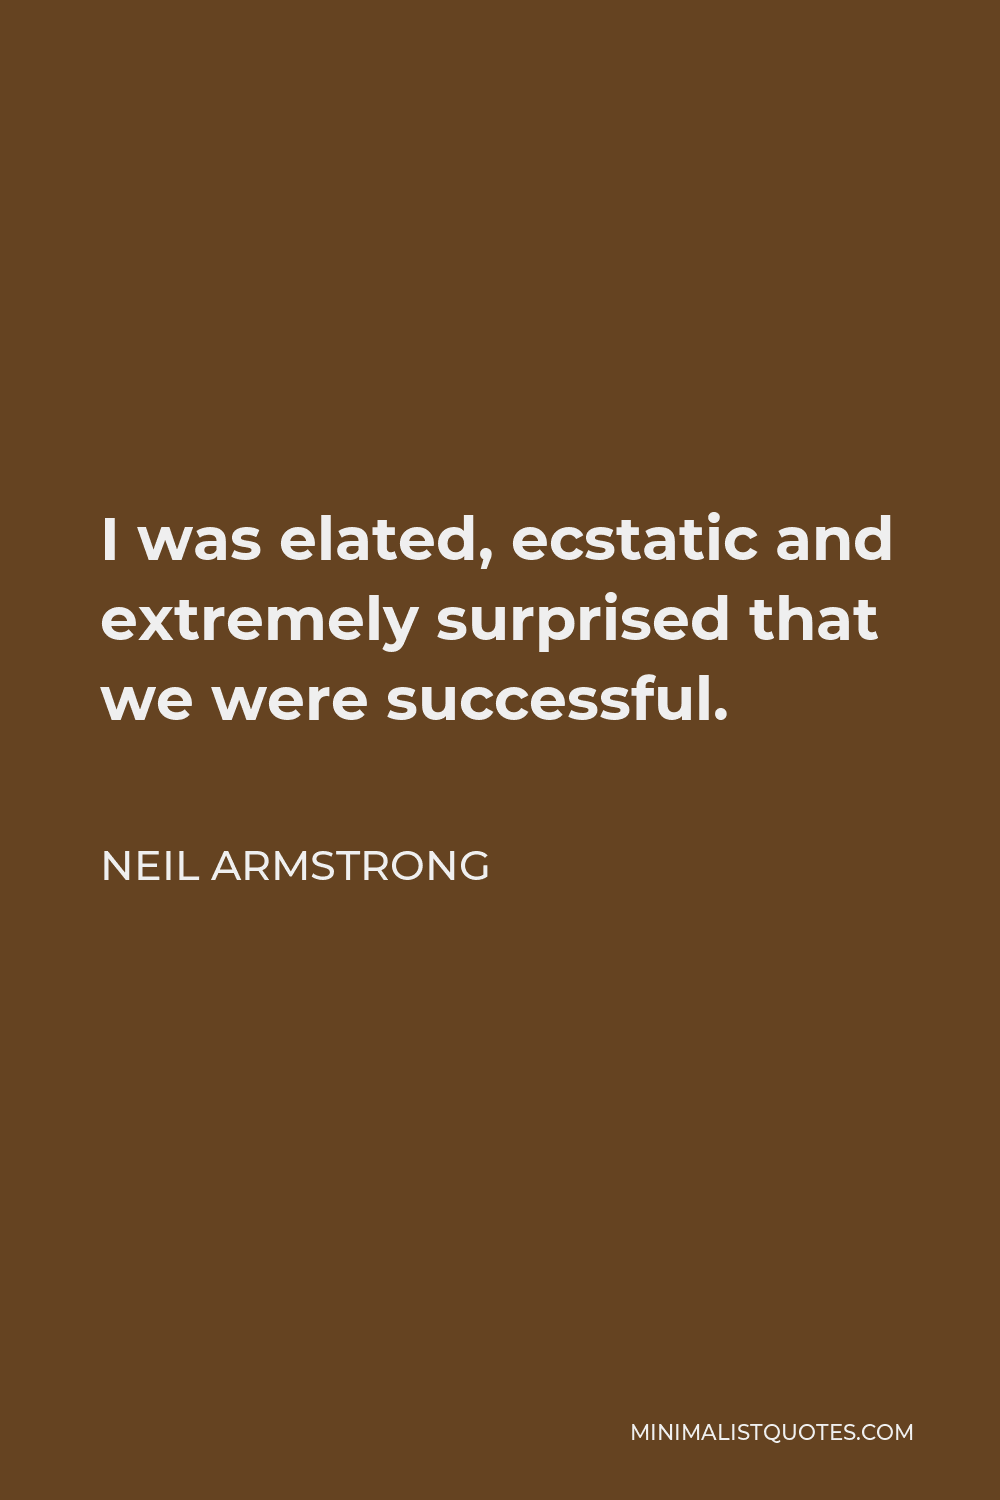 Neil Armstrong Quote - I was elated, ecstatic and extremely surprised that we were successful.